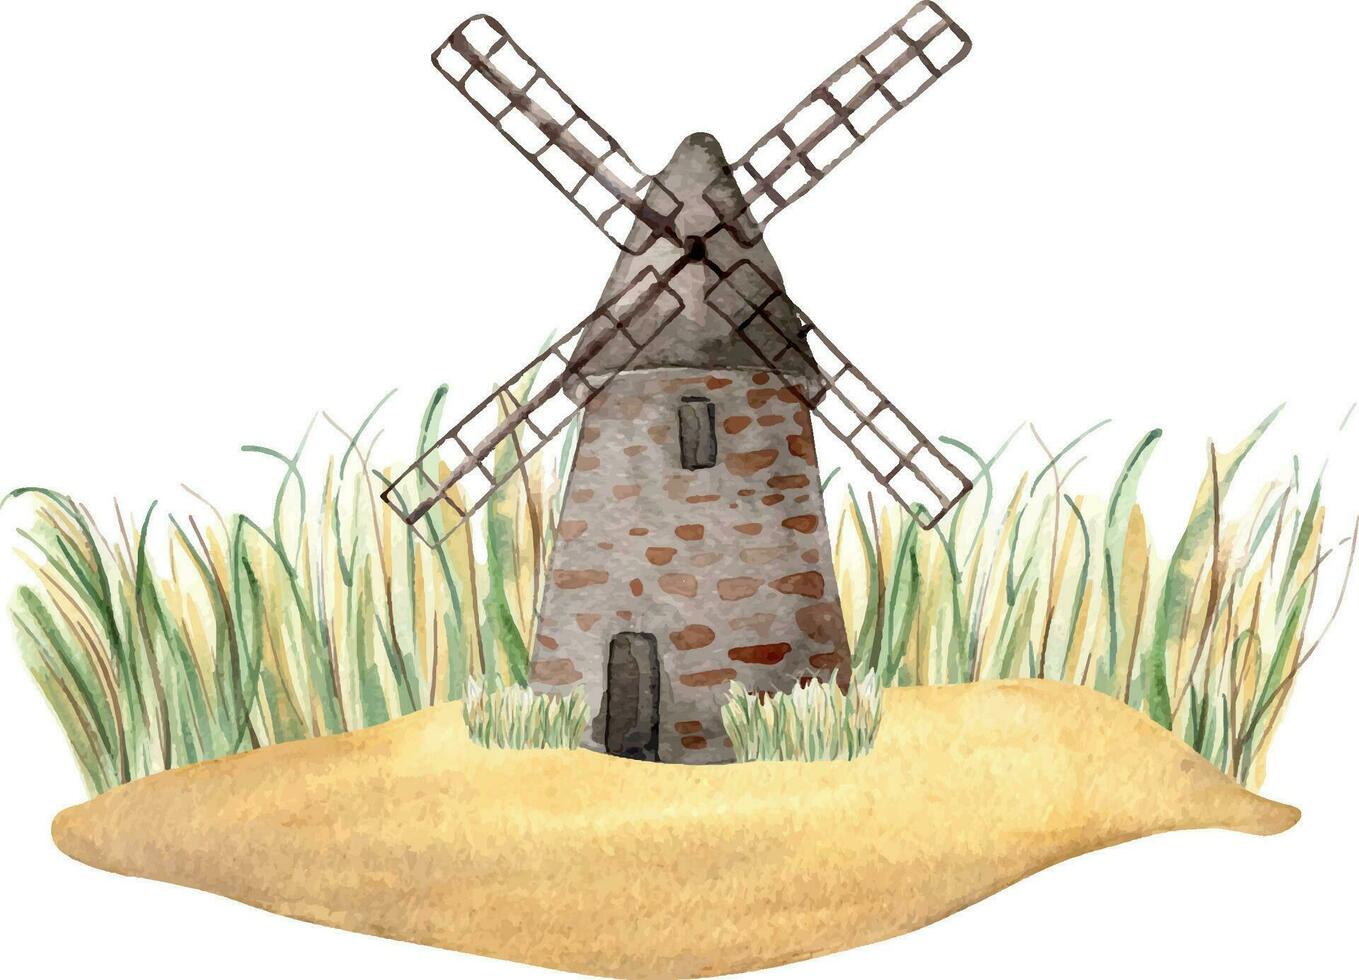 Windmill vintage watercolor illustration isolated on white background. Rural making bread mill hand drawn. Painted milling plant. Landscape for design package bread, flour, grocery store, bakery vector